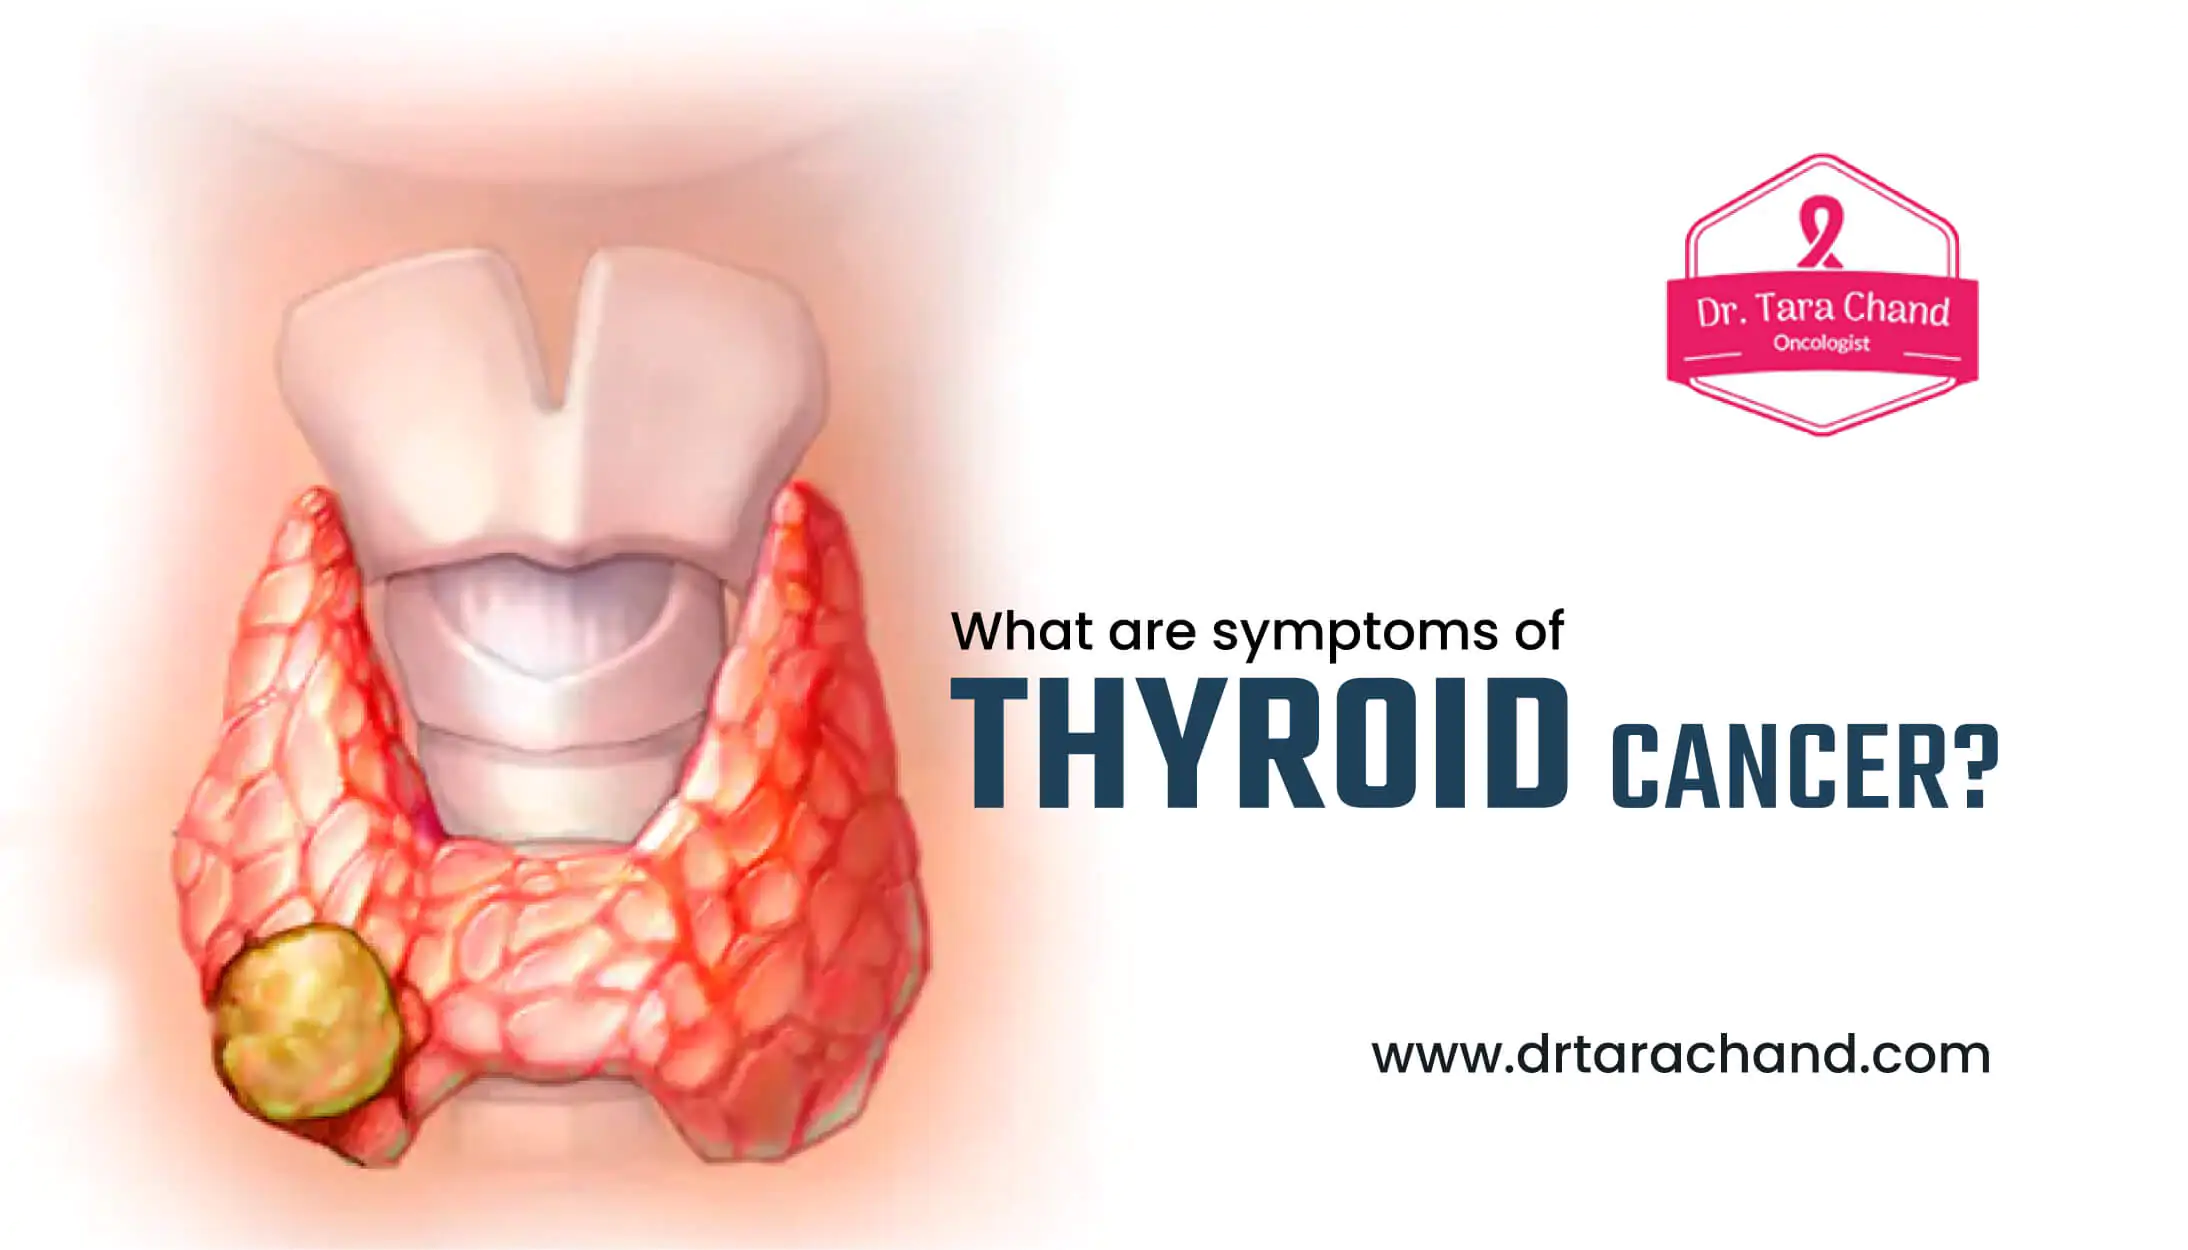 What are the symptoms of thyroid cancer?